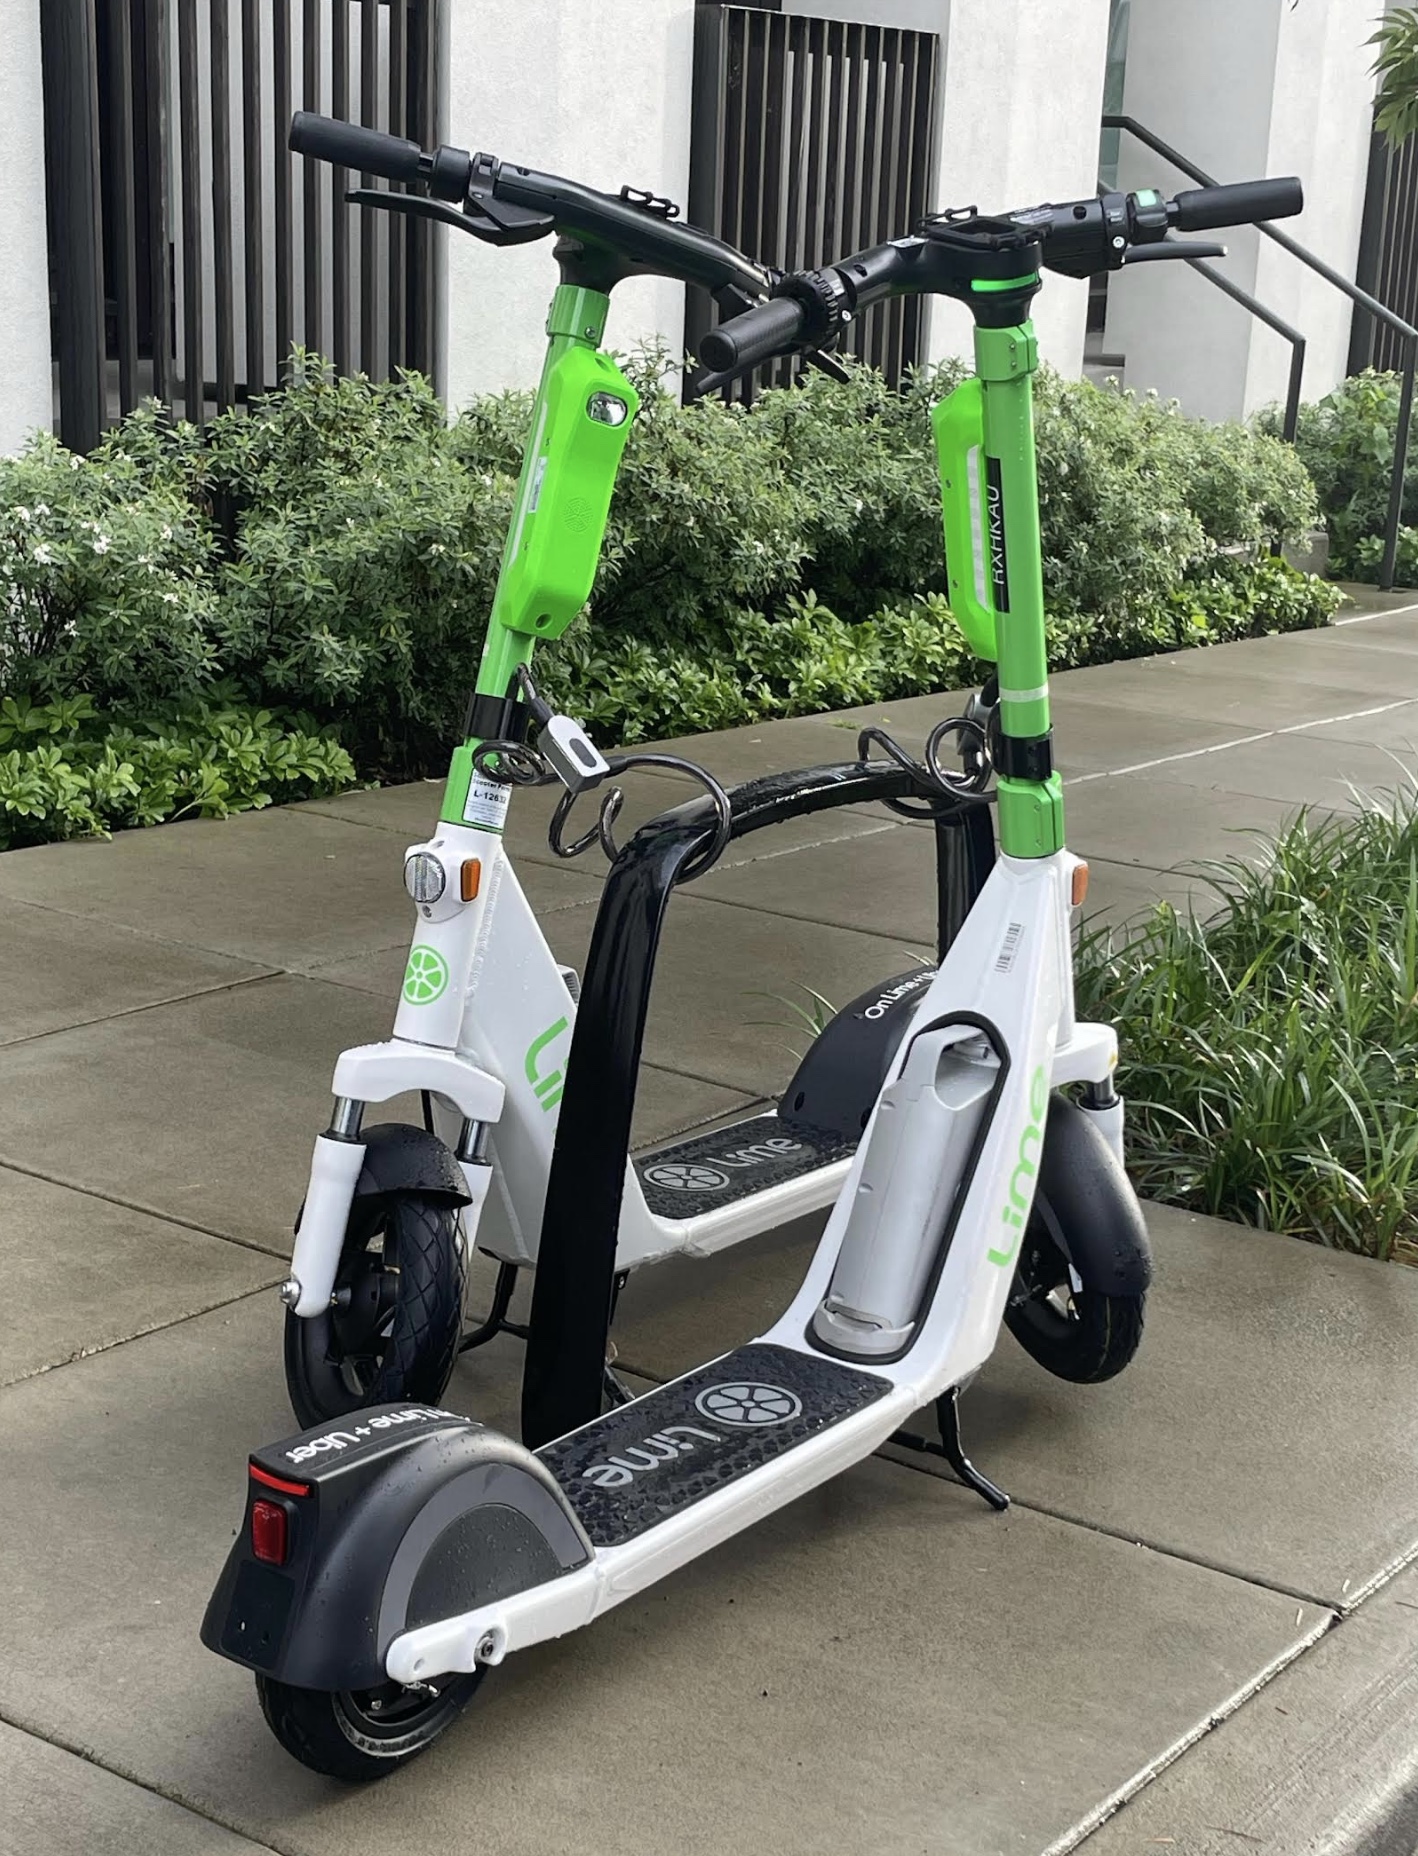 After 2 million rides, Lime upgrades e-scooter fleet with locking batteries – BikePortland